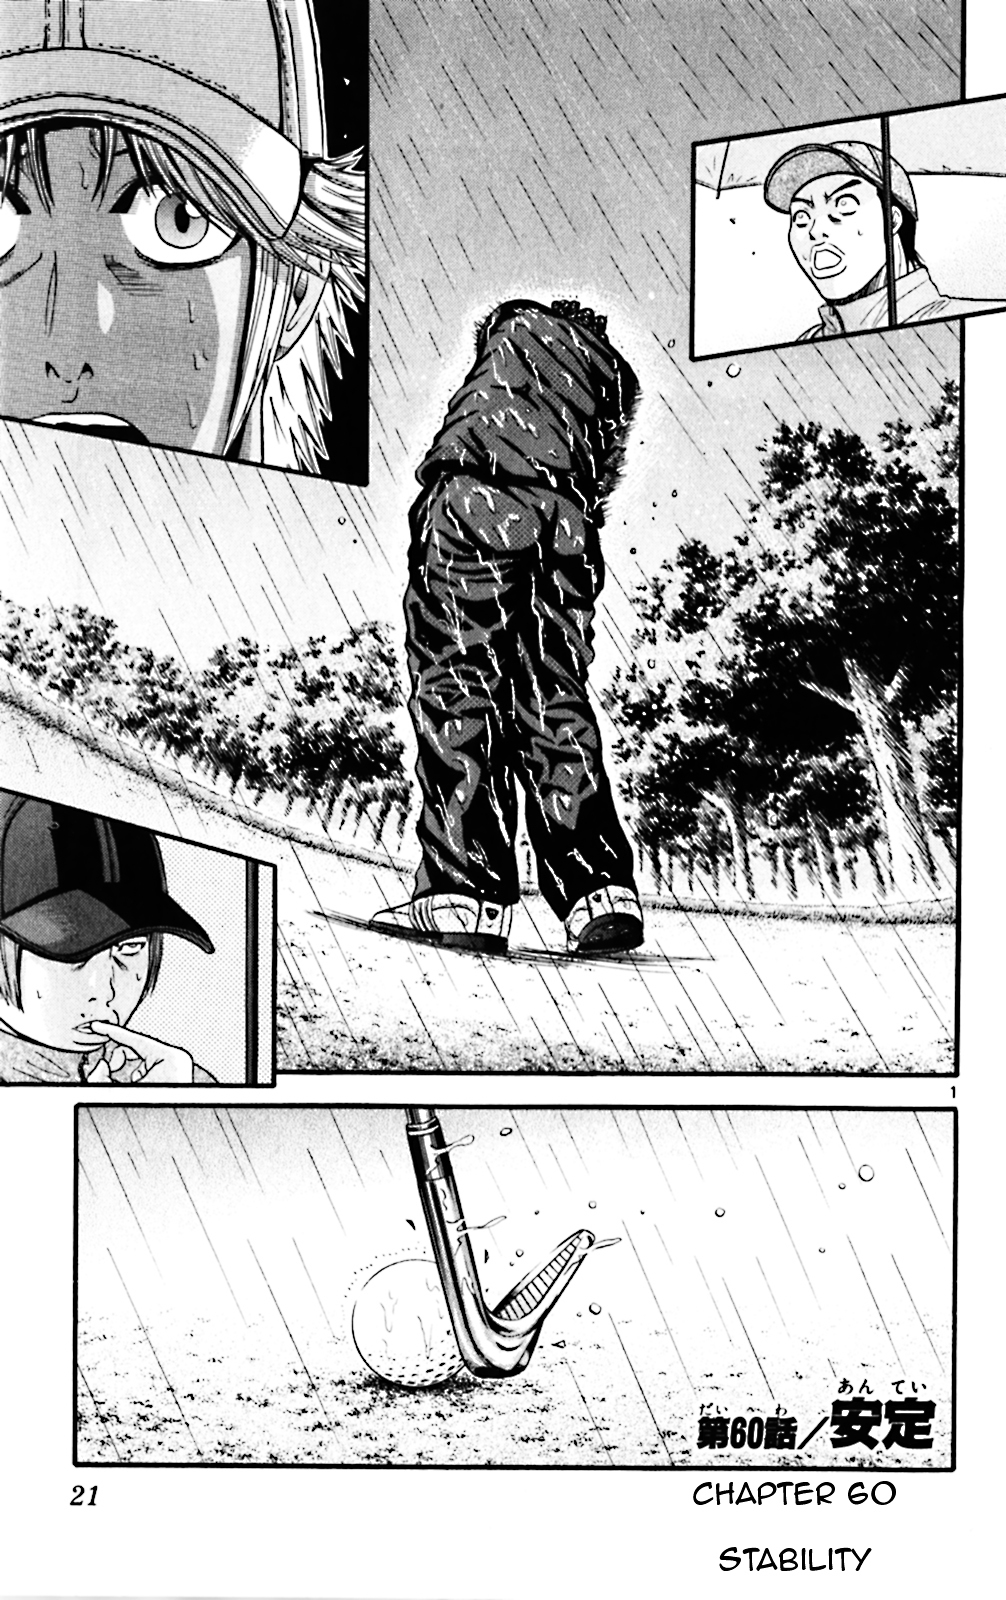 King Golf - Page 1